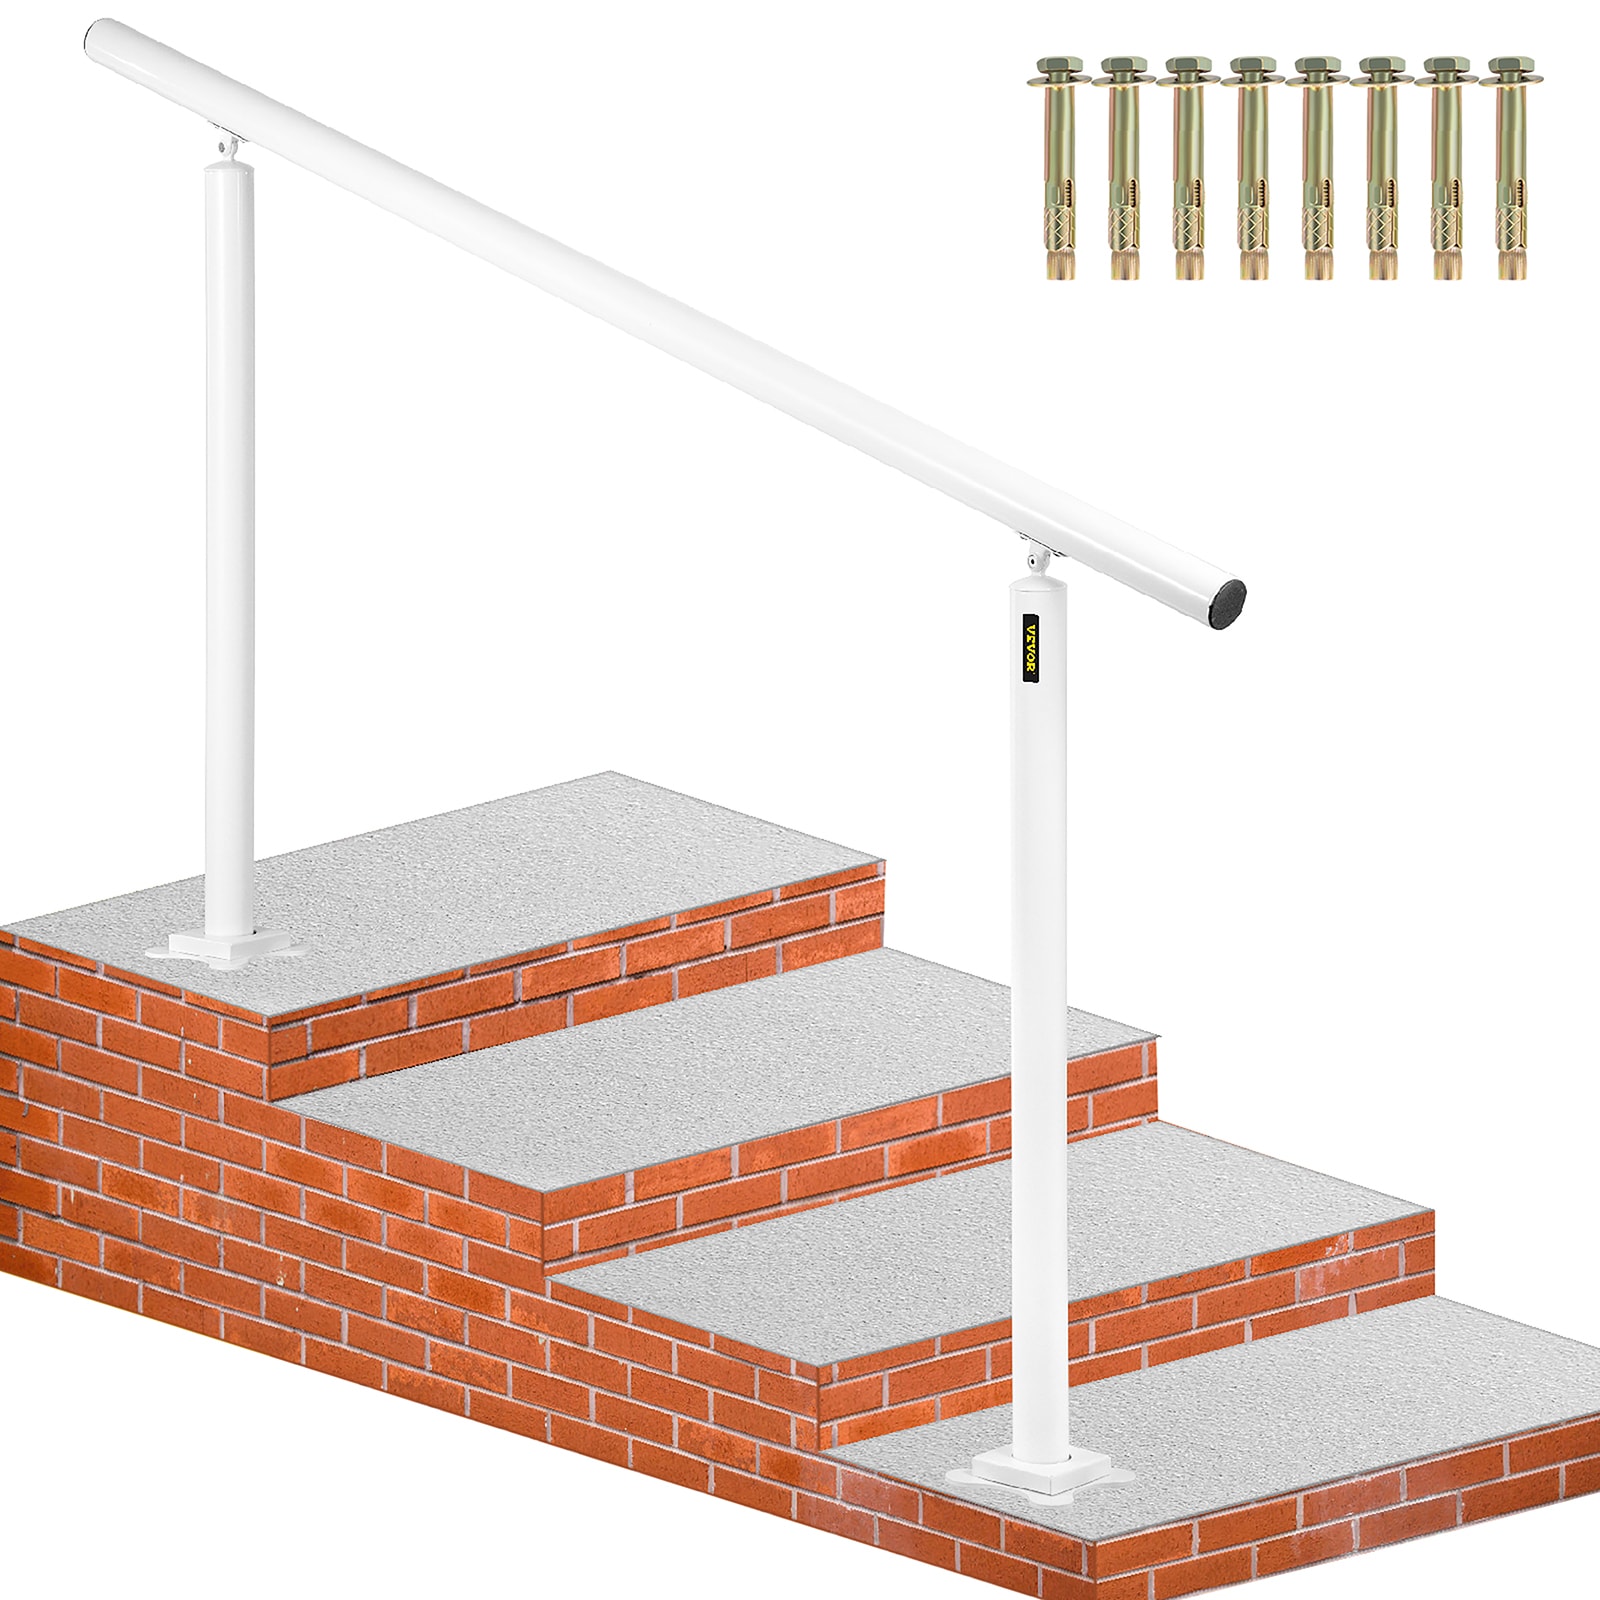 Handrail kit Deck Railing Systems at Lowes.com